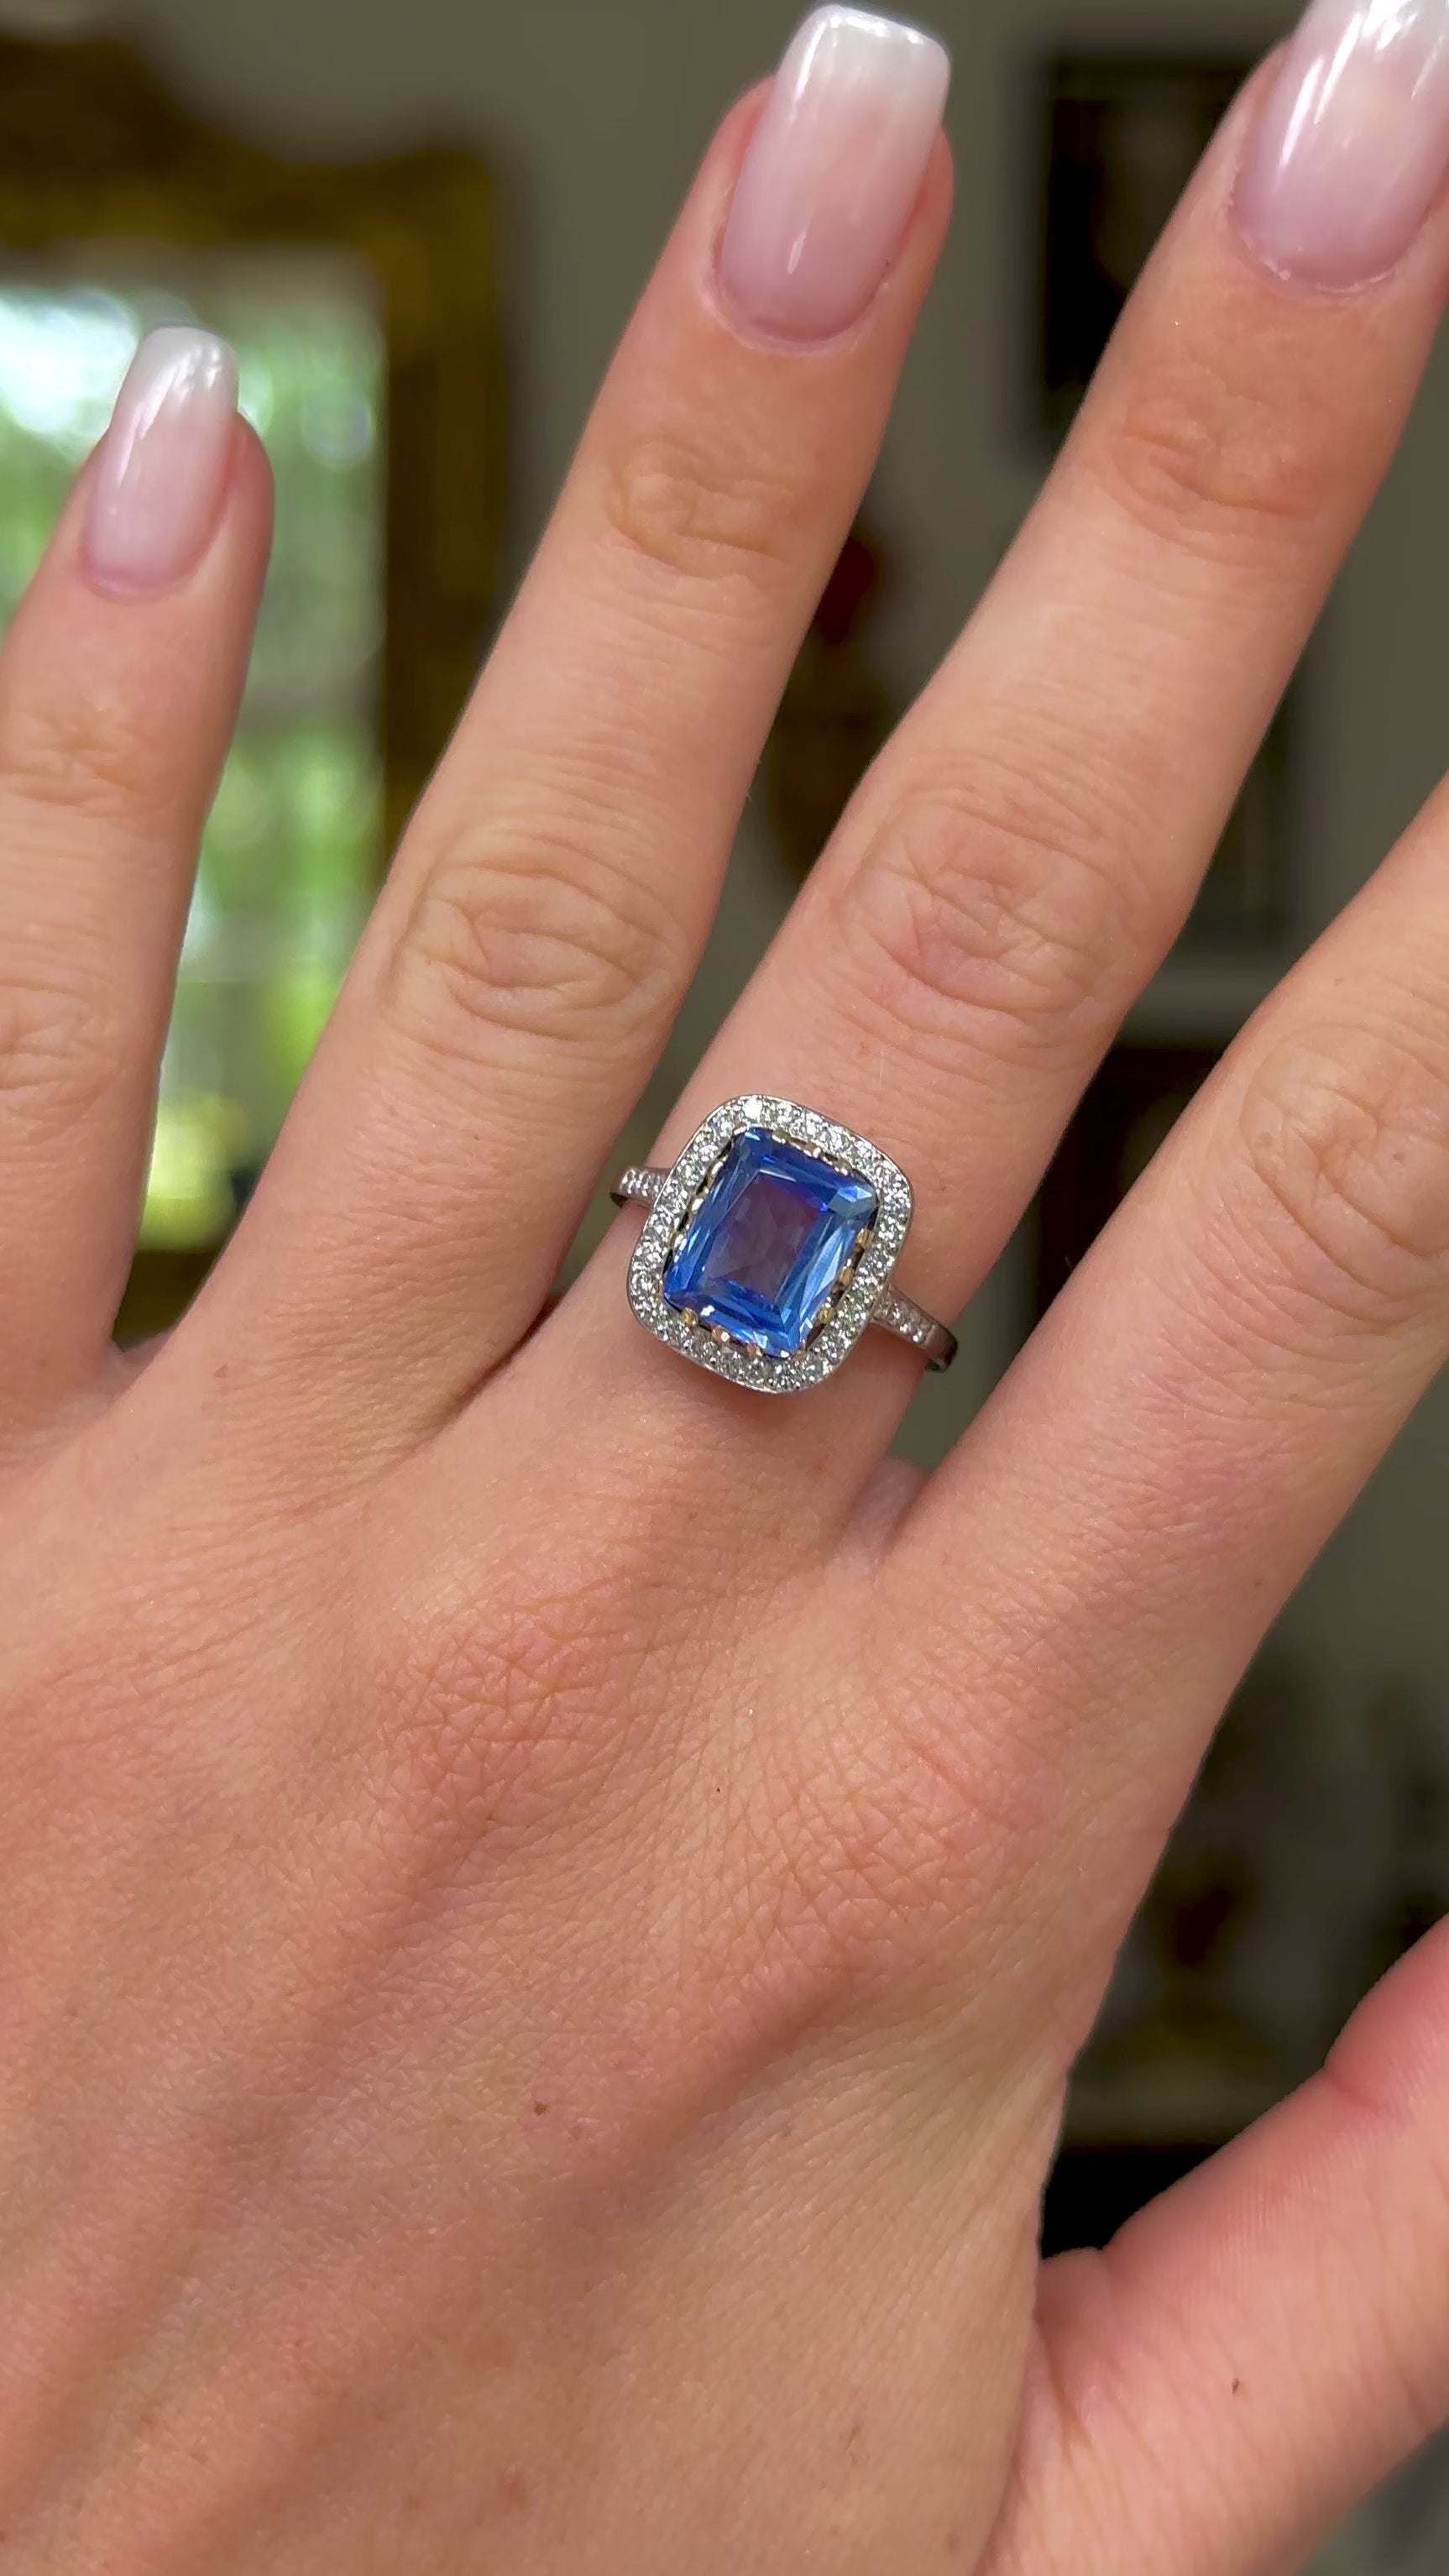 vintage sapphire and diamond cluster engagement ring worn on hand and moved around to give perspective.